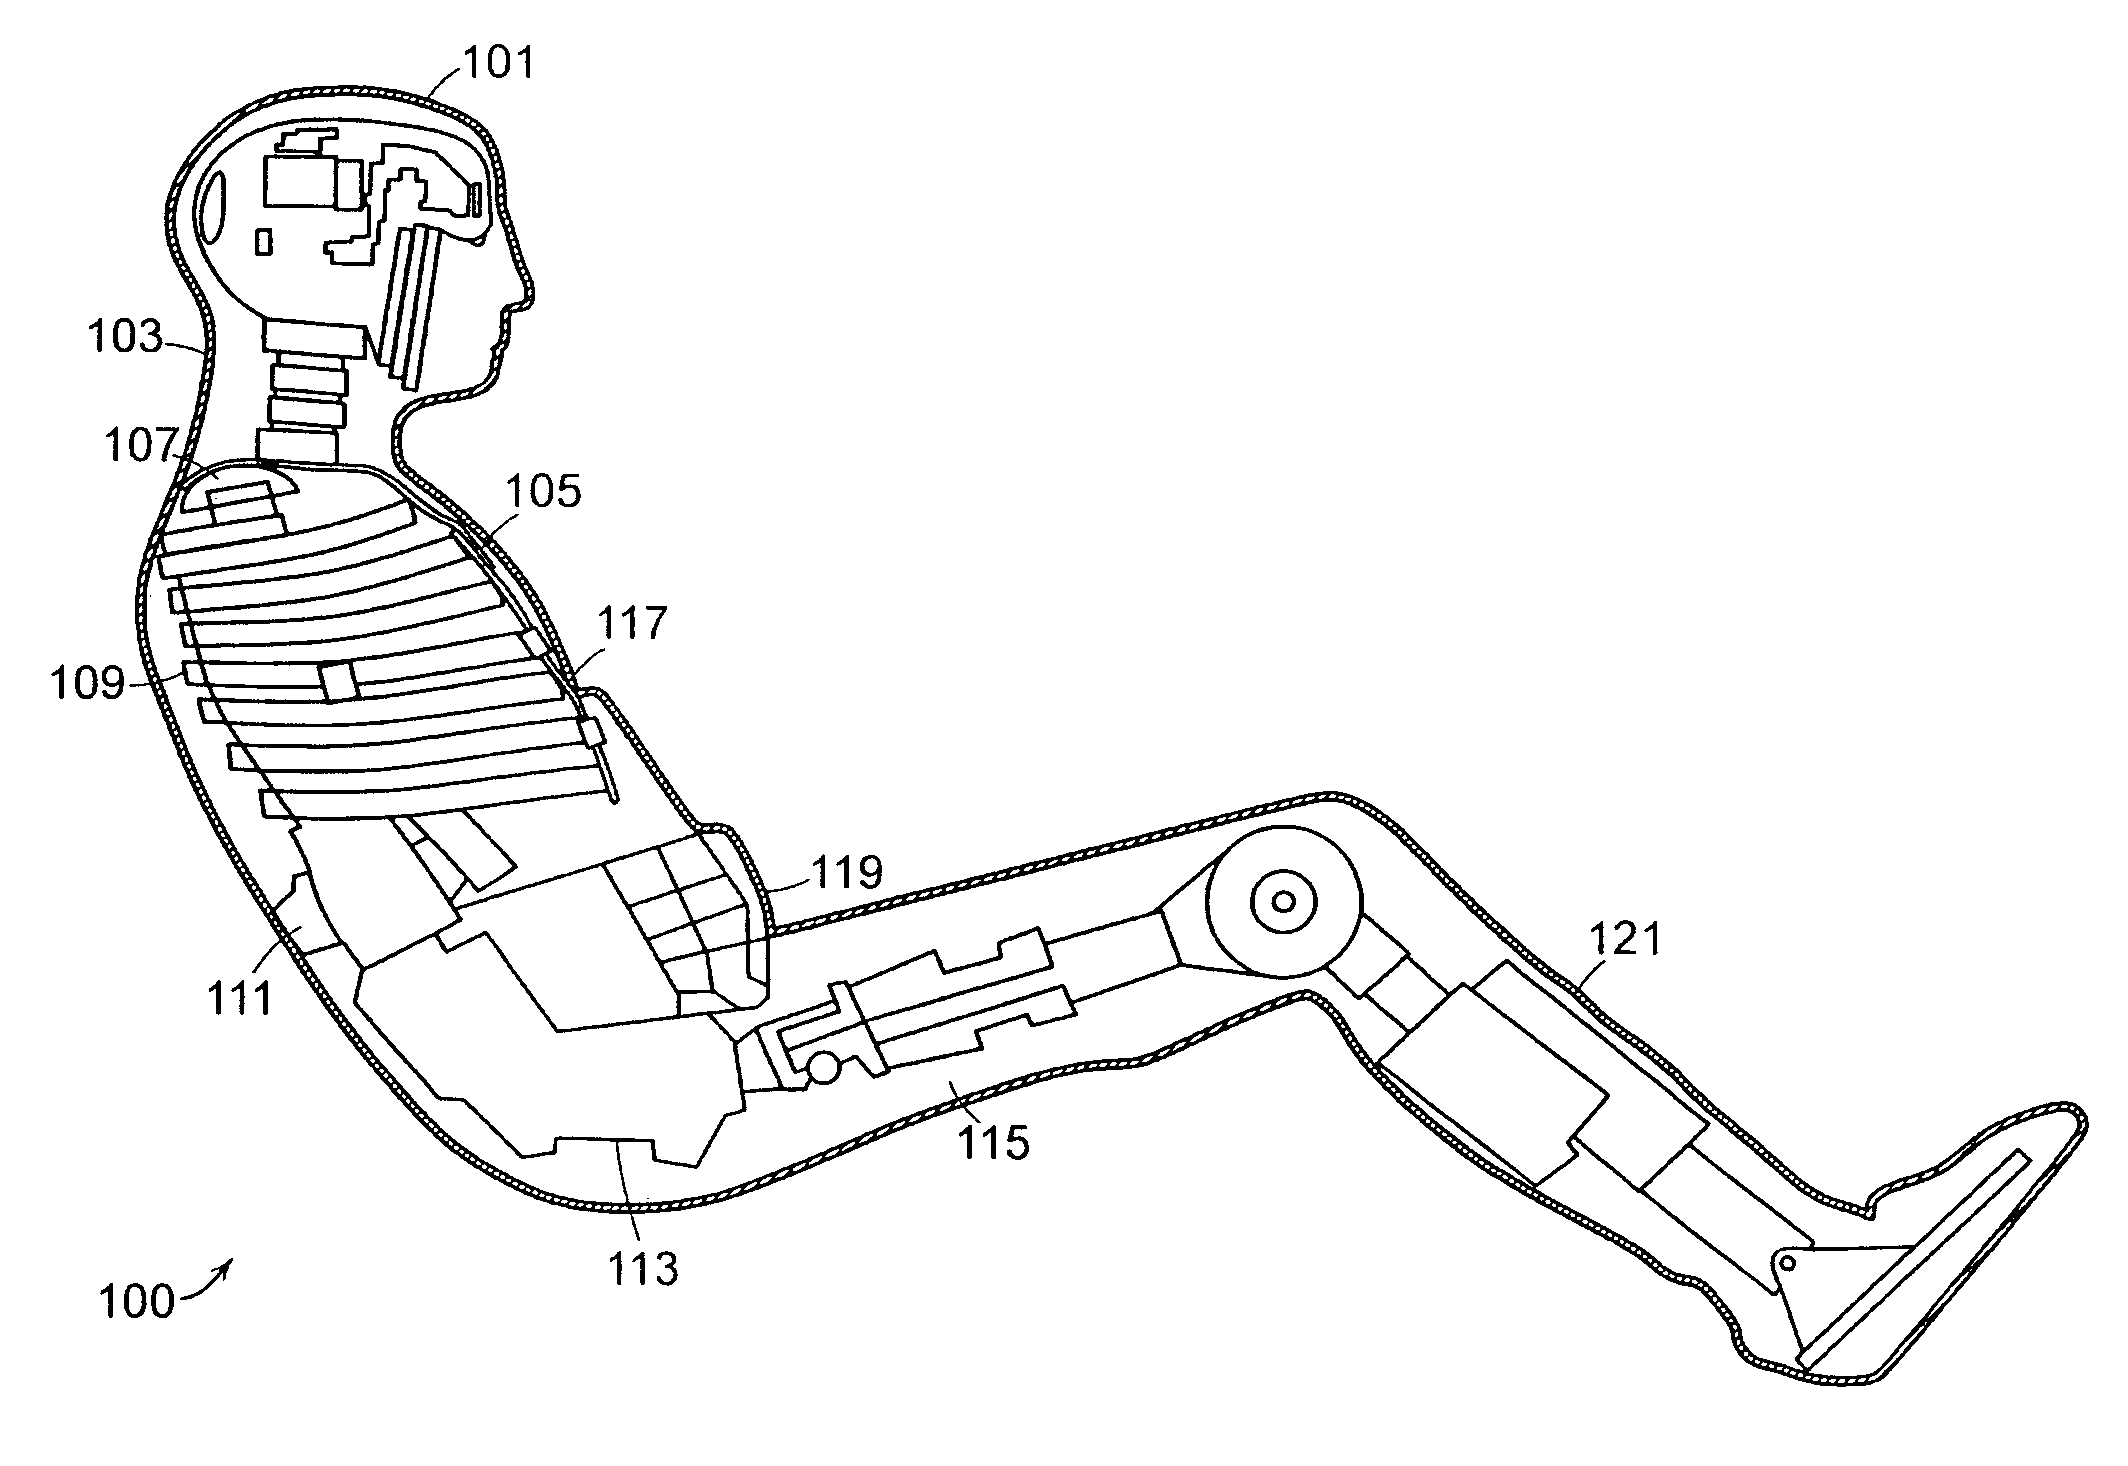 Multi-point position measuring and recording system for anthropomorphic test devices